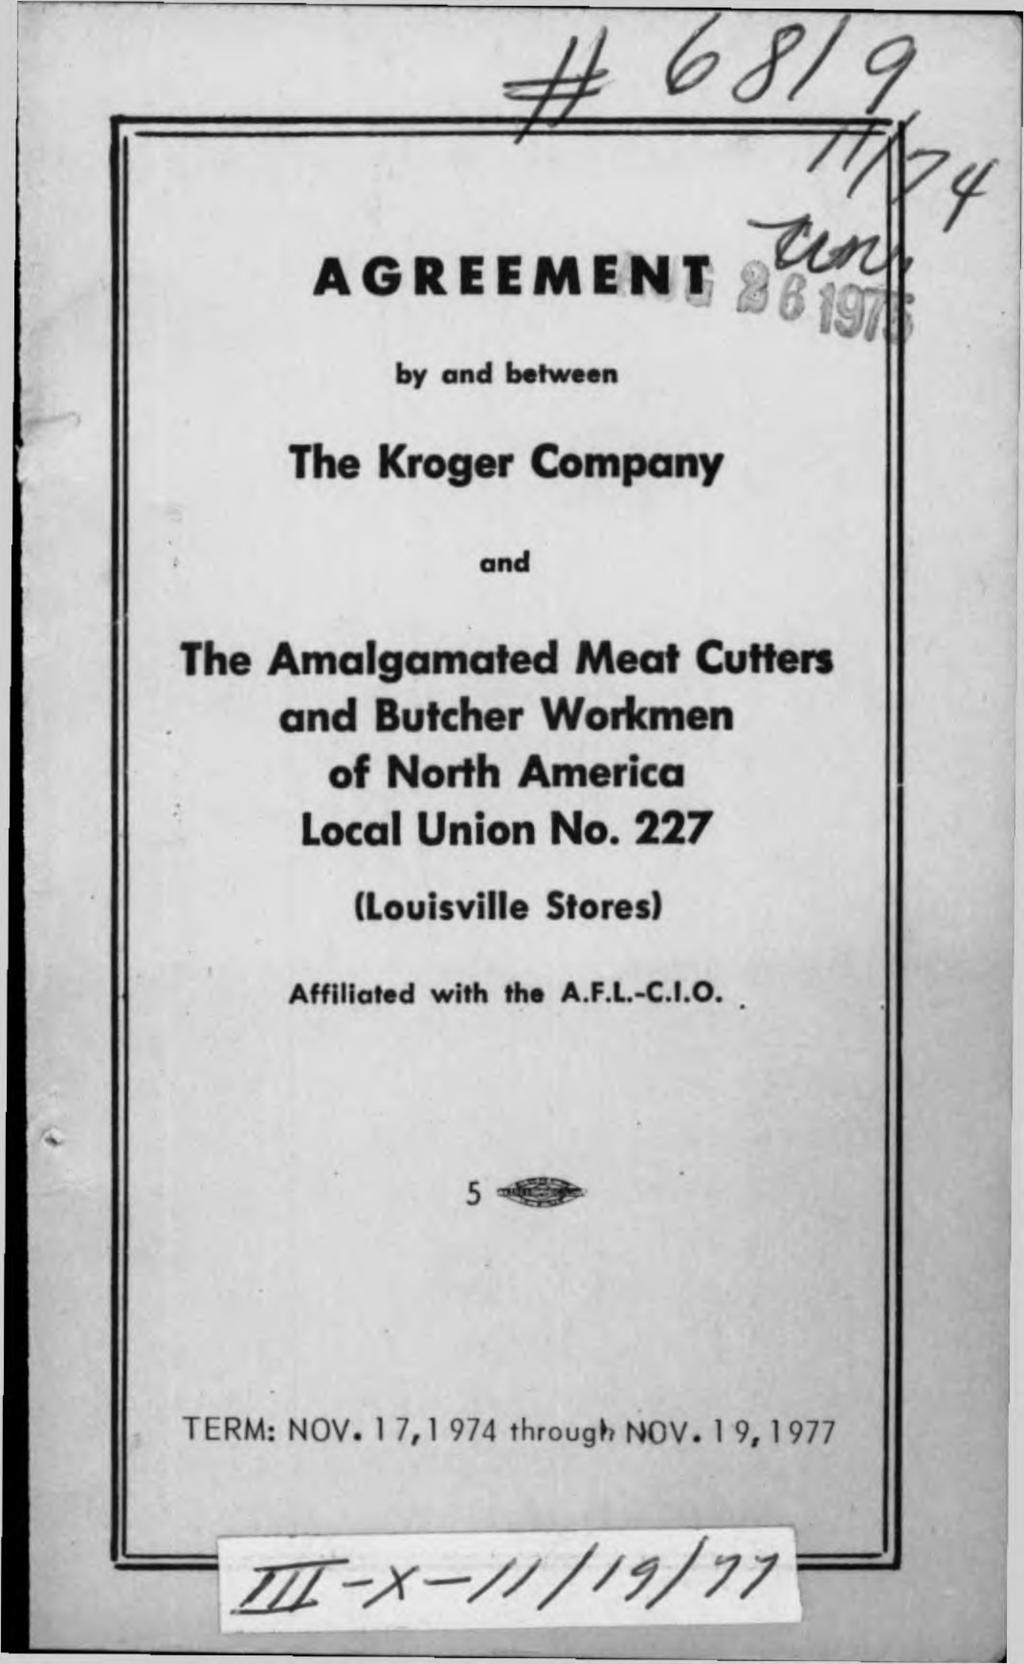 L S 6 < f/ 9_ " f o - AGREEM ENT r > by and between The Kroger Company and The Amalgamated Meat Cutters and Butcher Workmen of